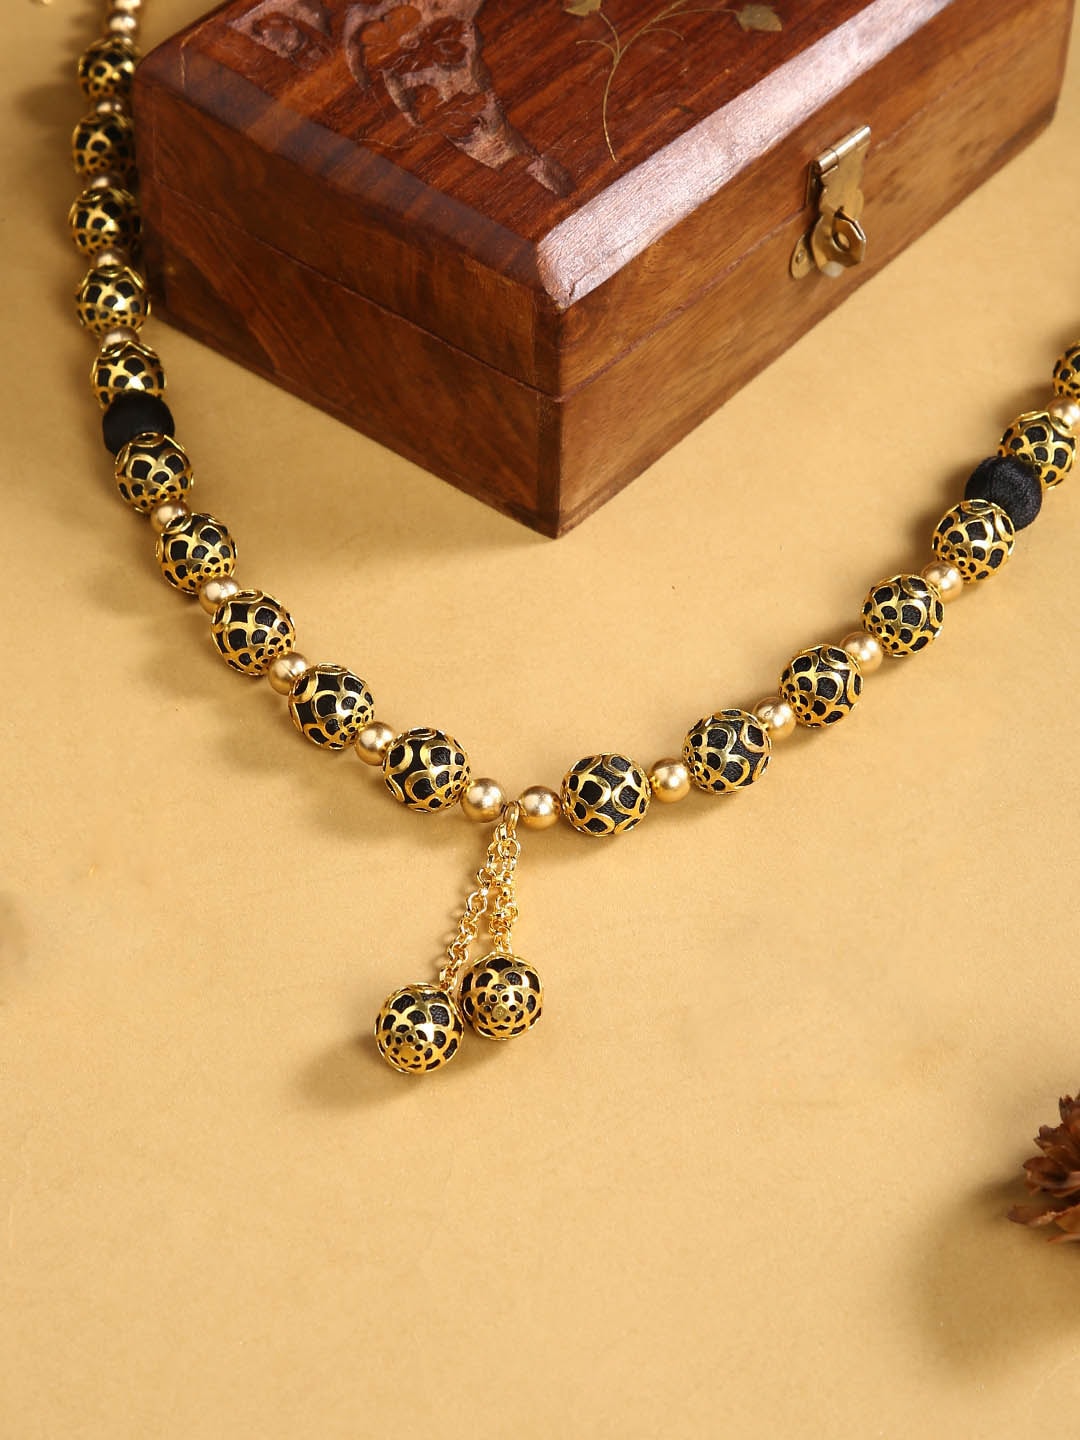 AKSHARA Black & Gold-Toned German Silver Gold-Plated Handcrafted Necklace Price in India